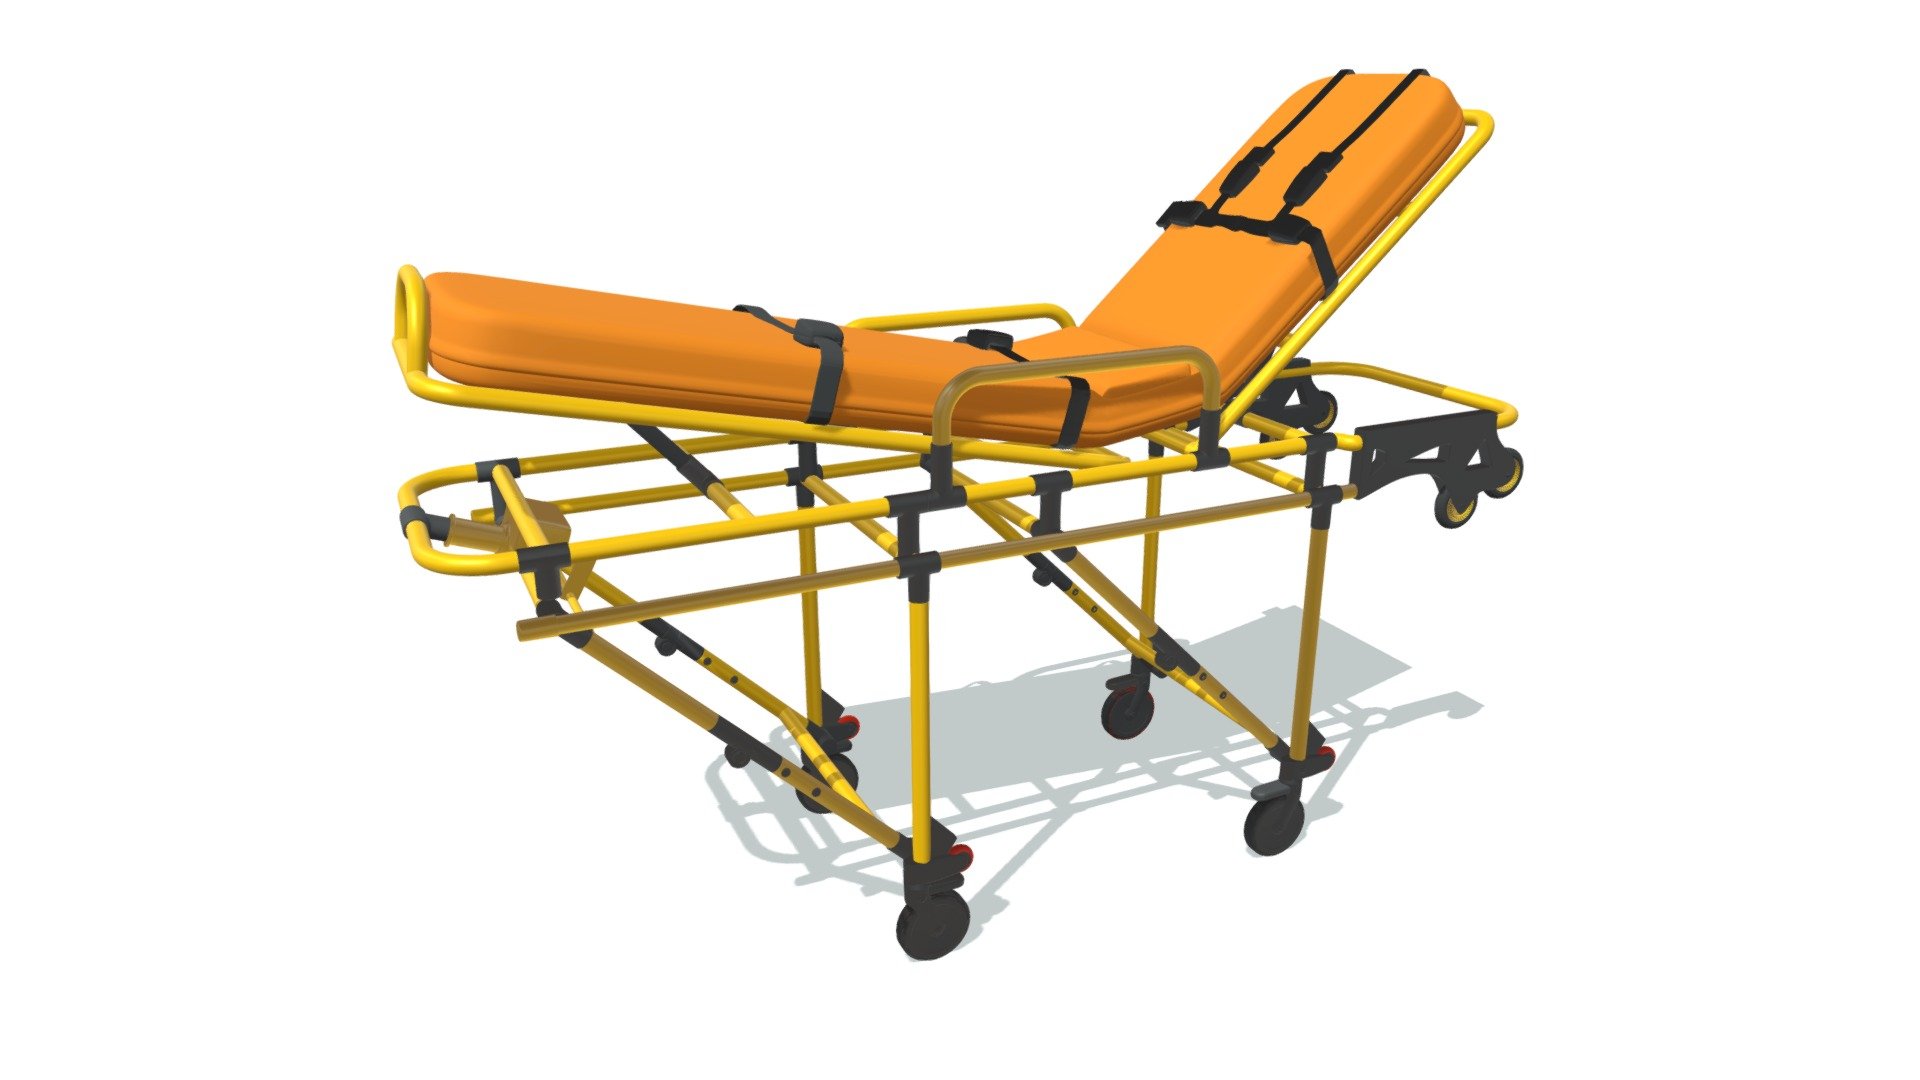 High quality 3d model of ambulance stretcher.
Colors can be easily modified.

If you need a file format that is different from what is available, please contact us 3d model